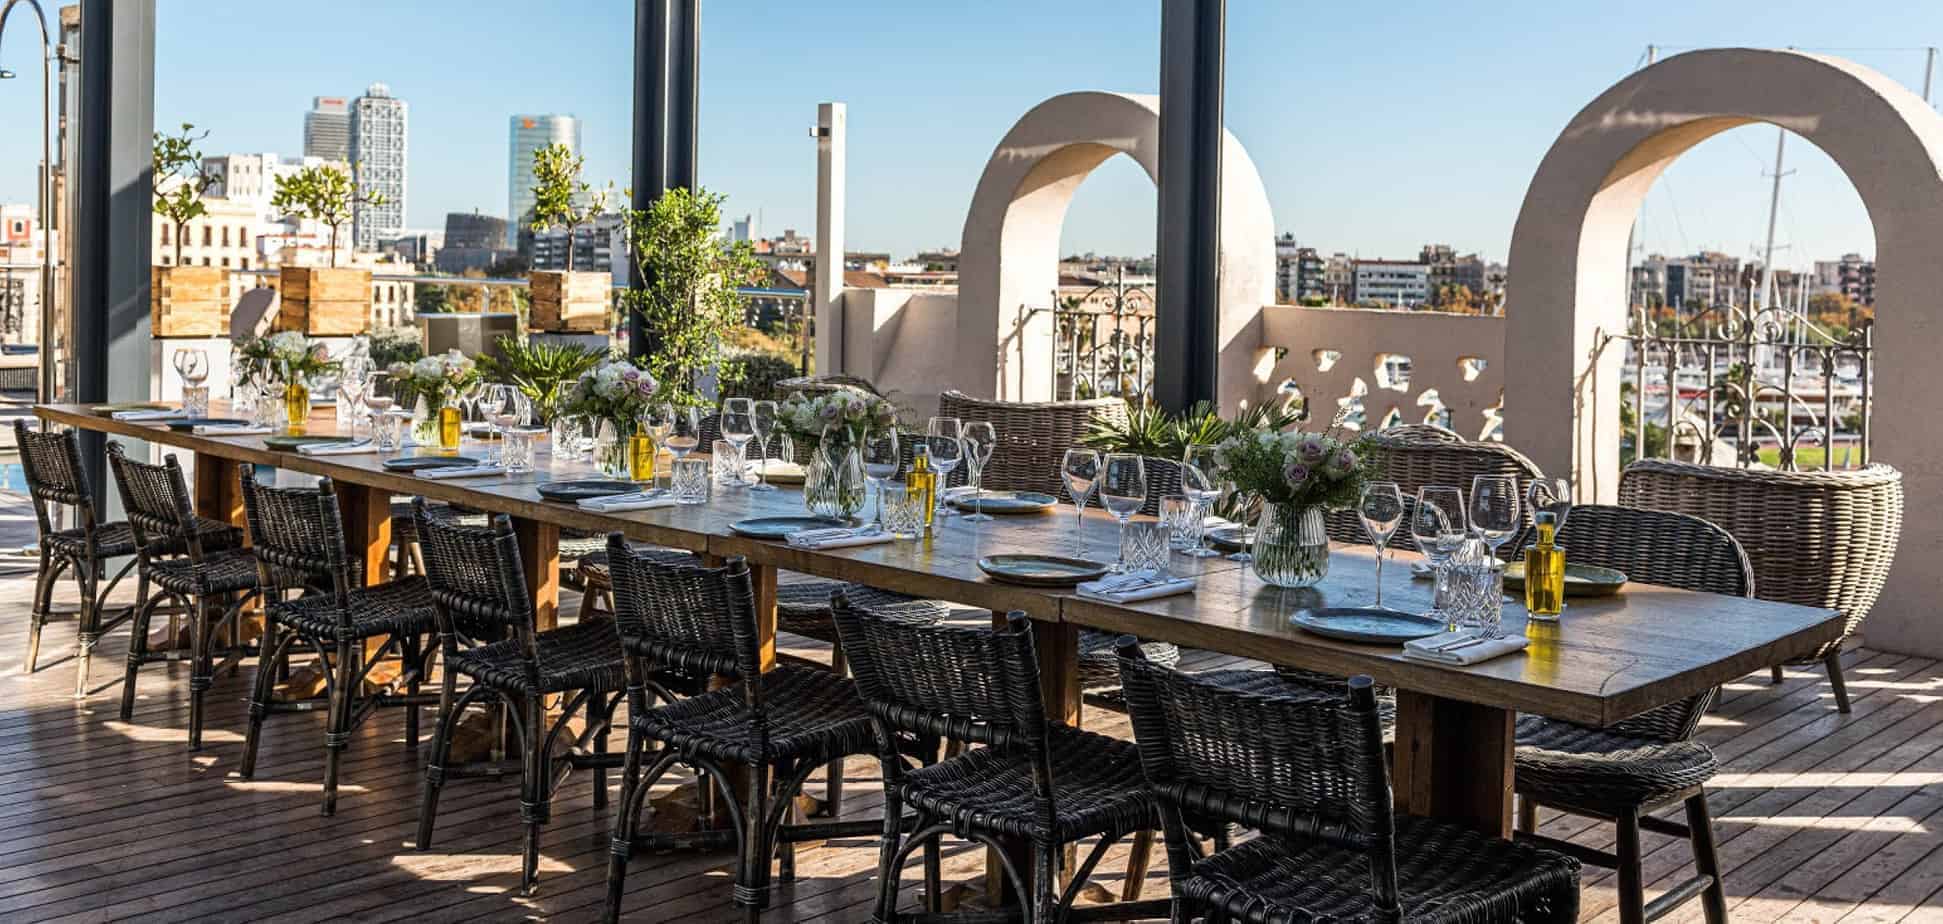 Idyllic rooftop terrace for remarkable events